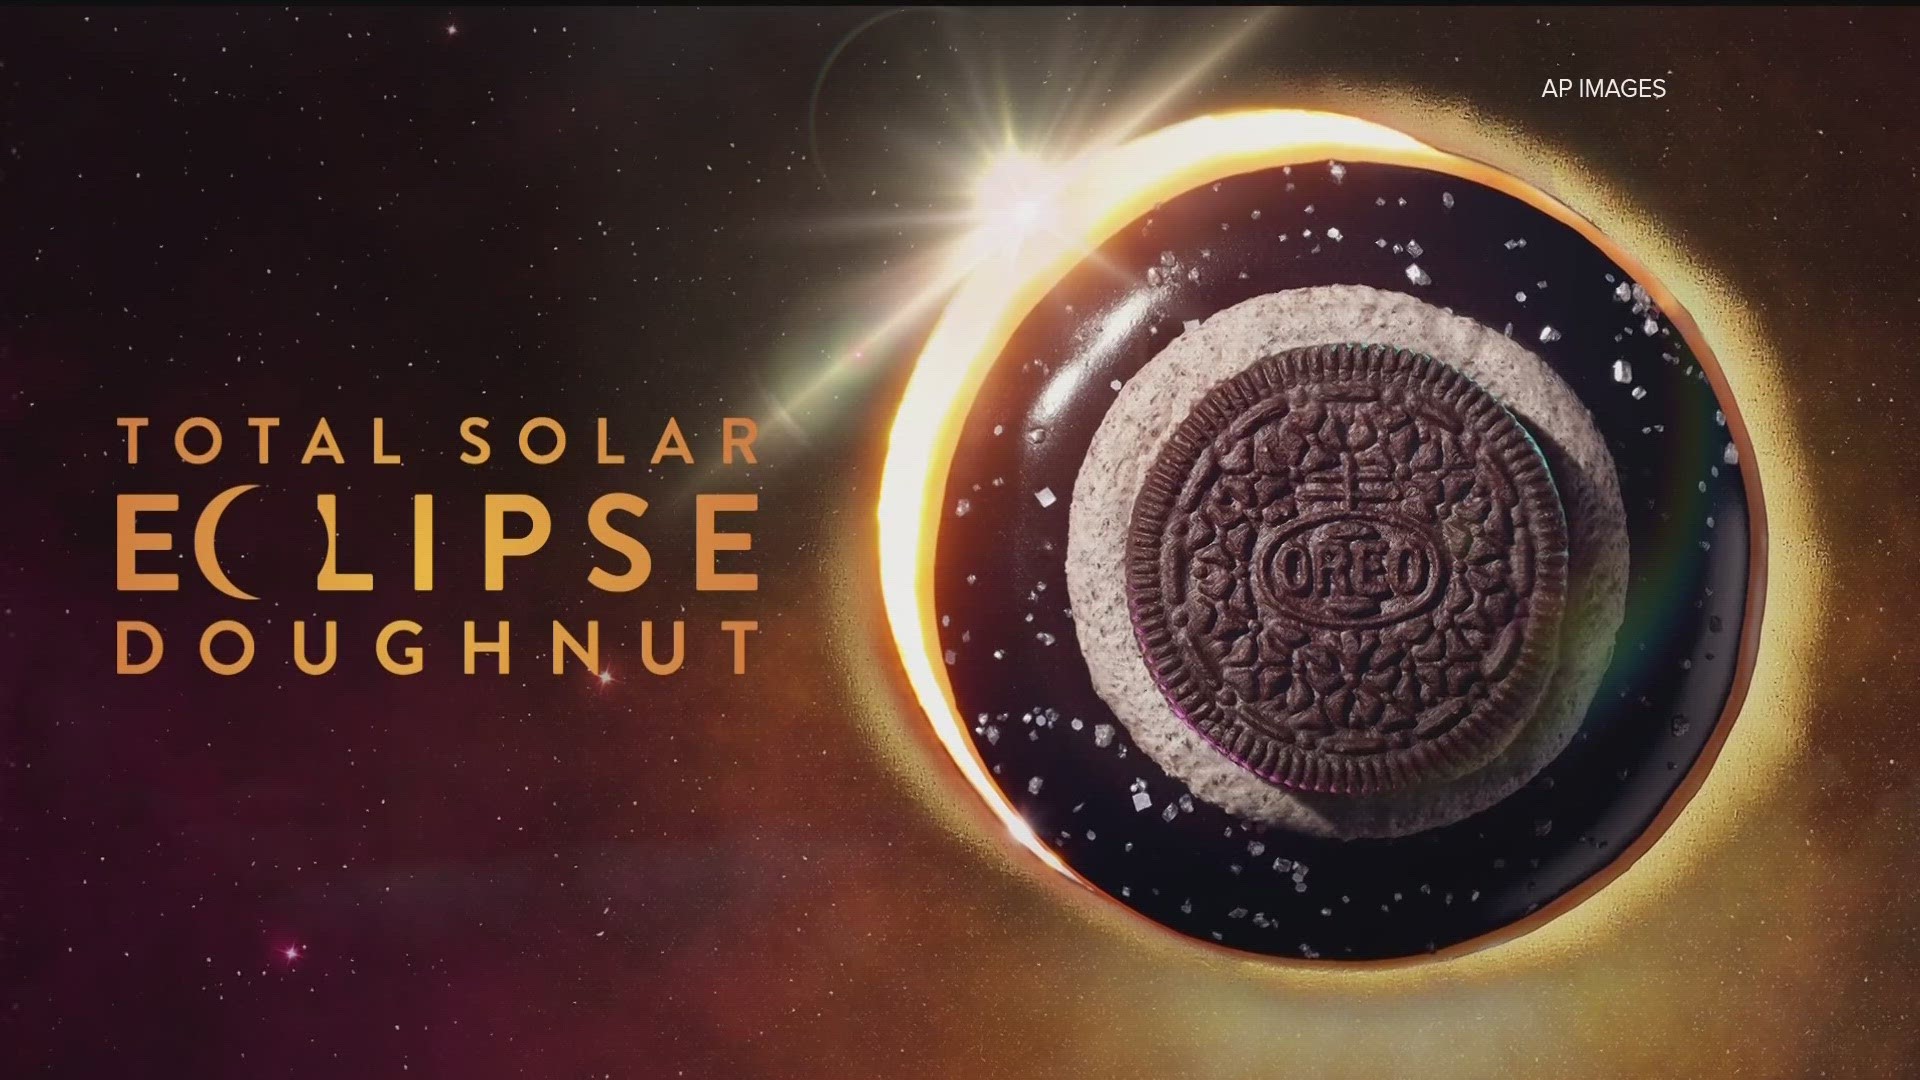 Now you can enjoy the eclipse with a sweet treat!